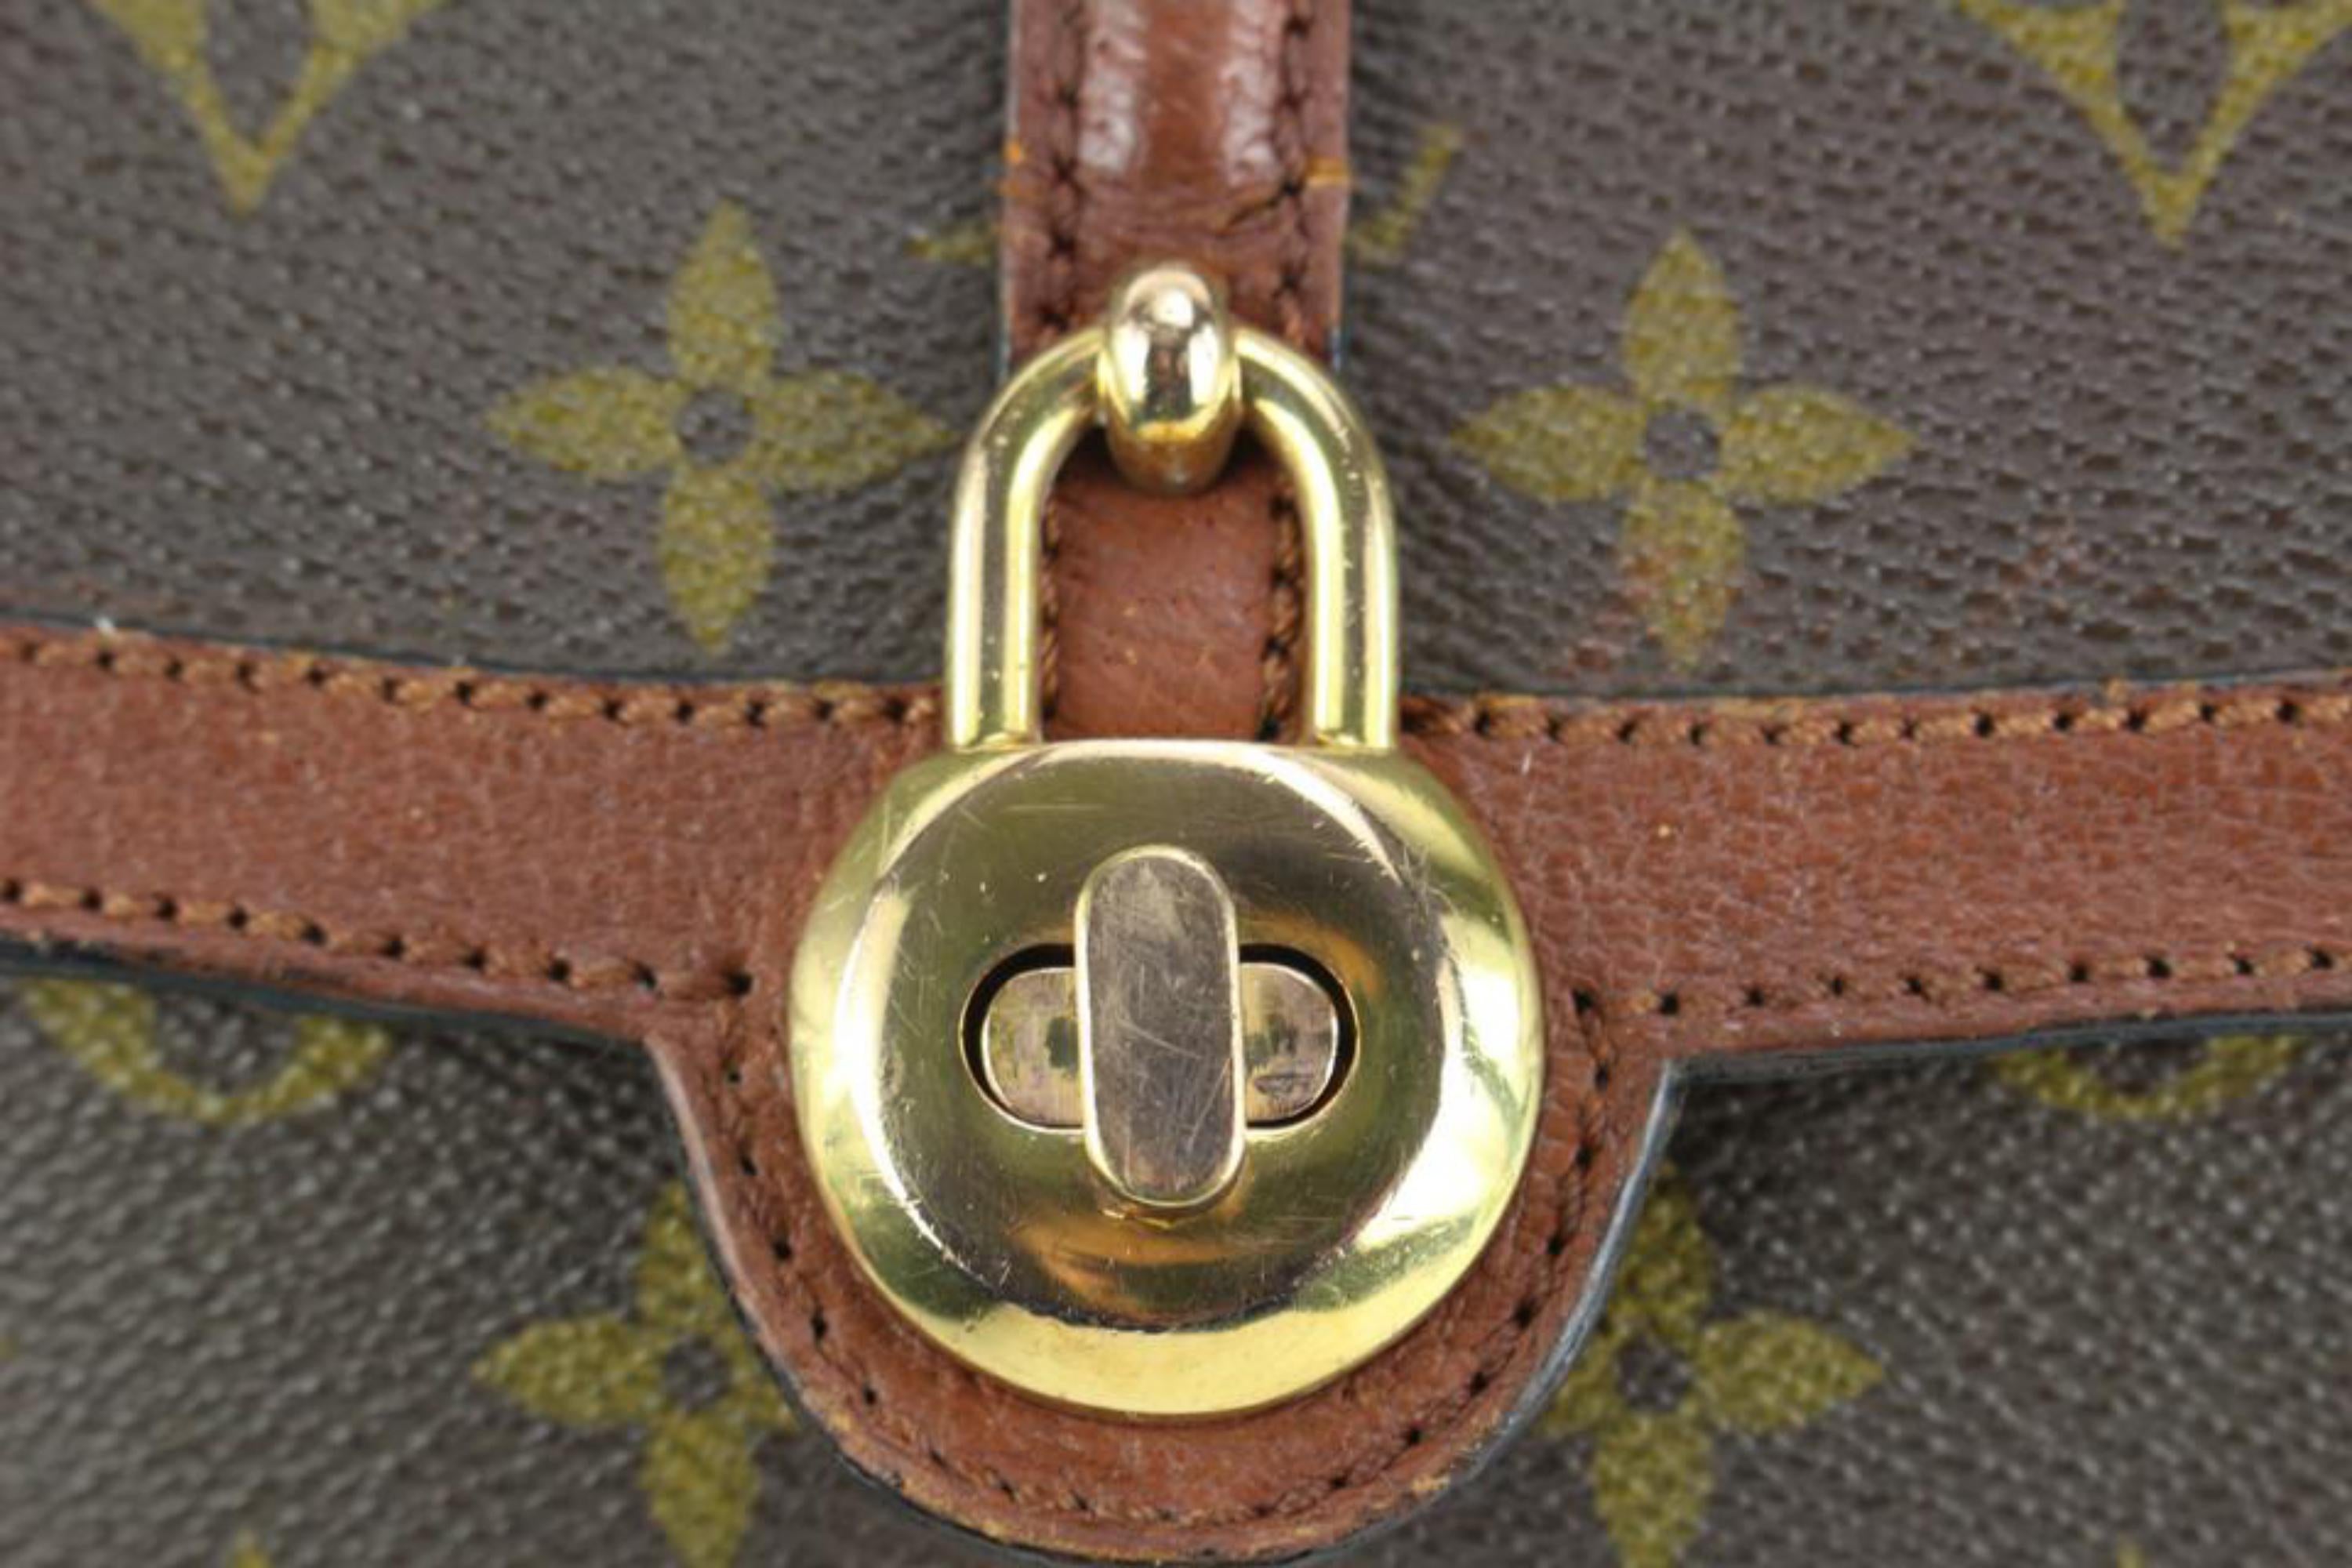 The 8 New Louis Vuitton Classic Monogram Bags Everyone Should Know